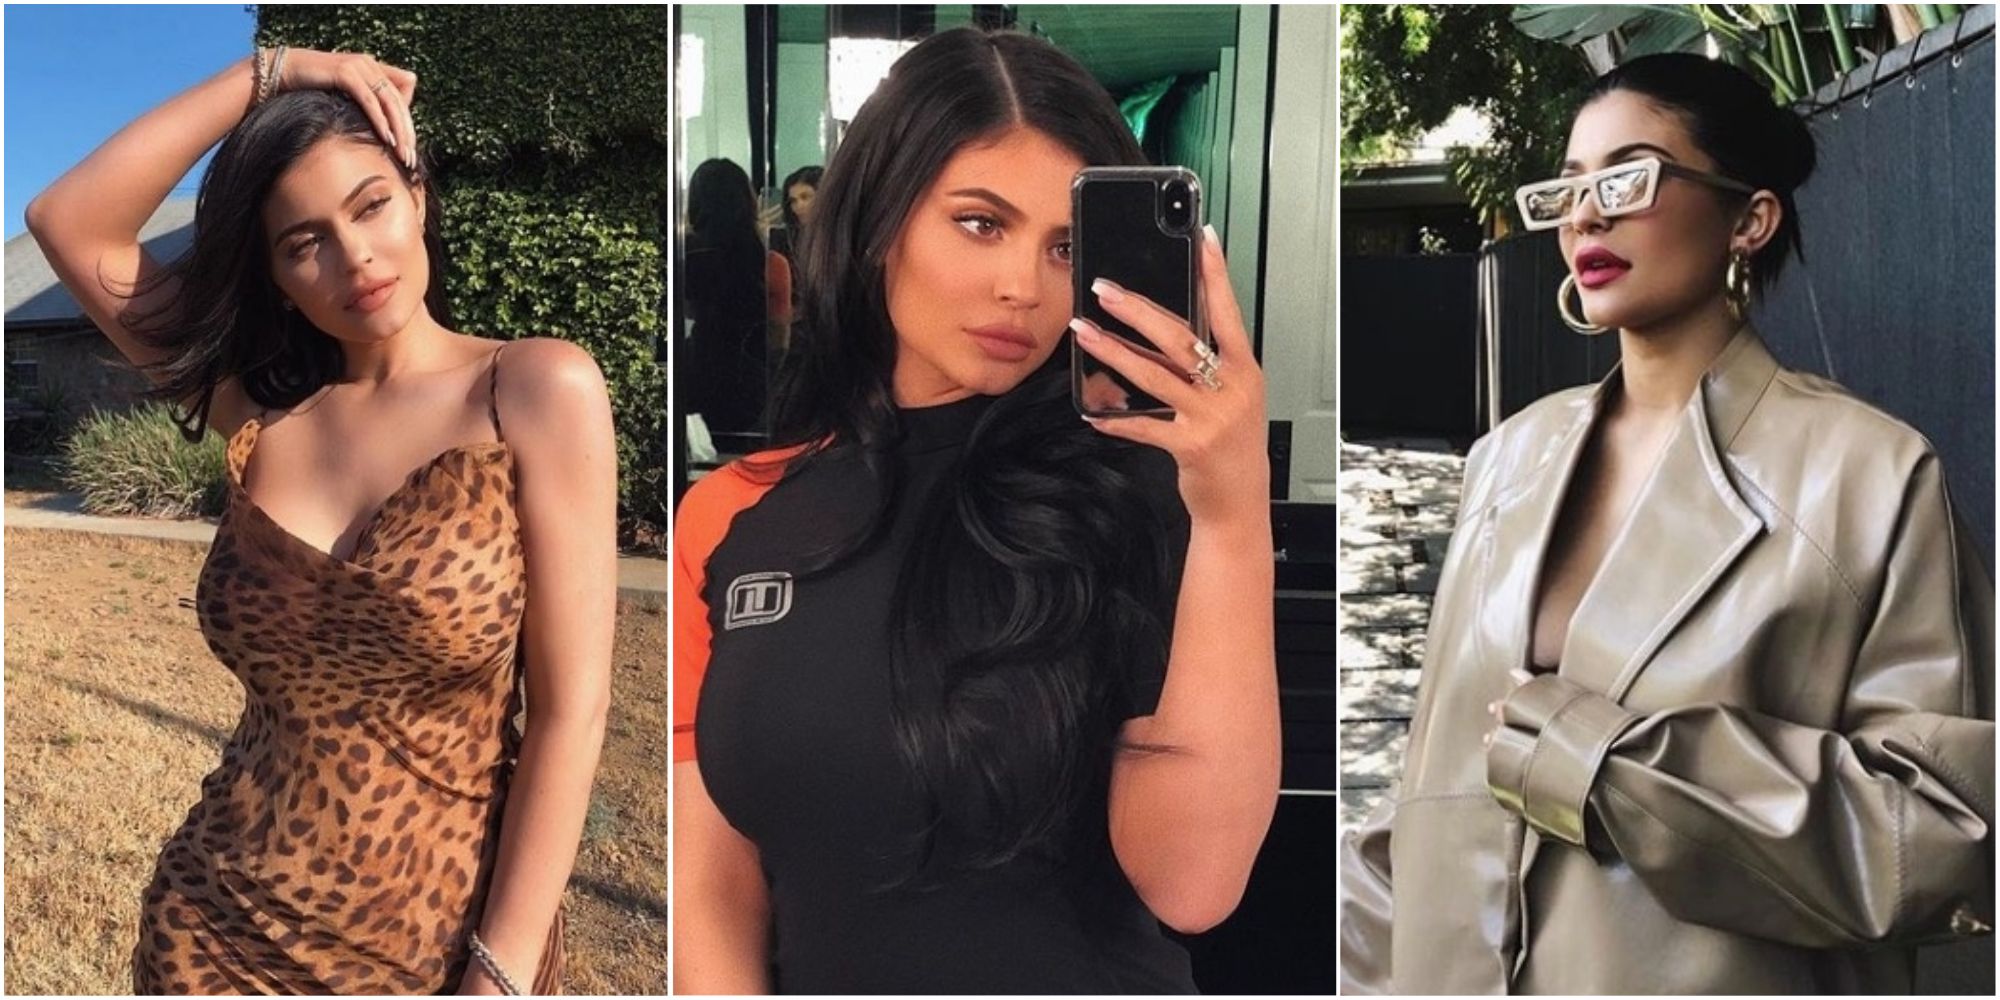 Kylie Jenner S Fashion Stylist Opens Up About Vicious Cycle